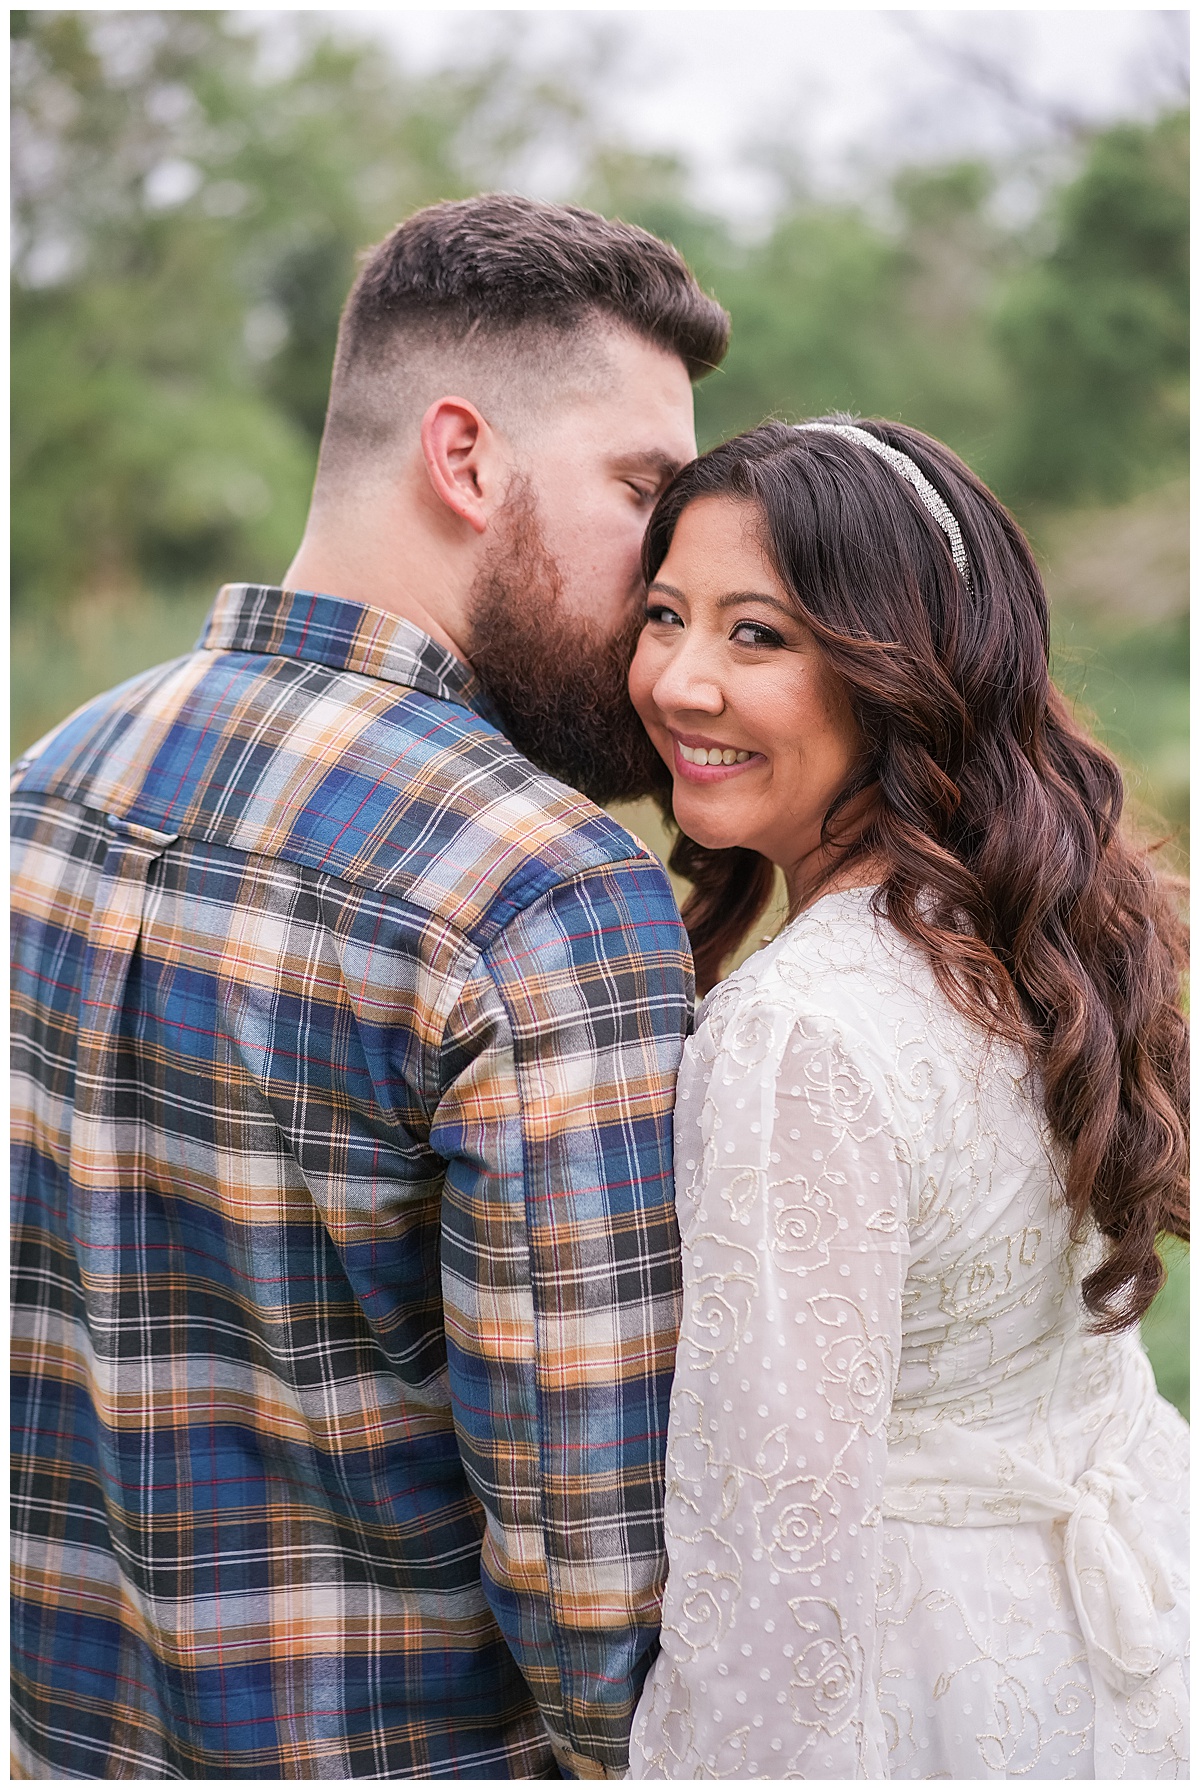 Man kisses woman on the cheek during their Houston Disney Engagement Session